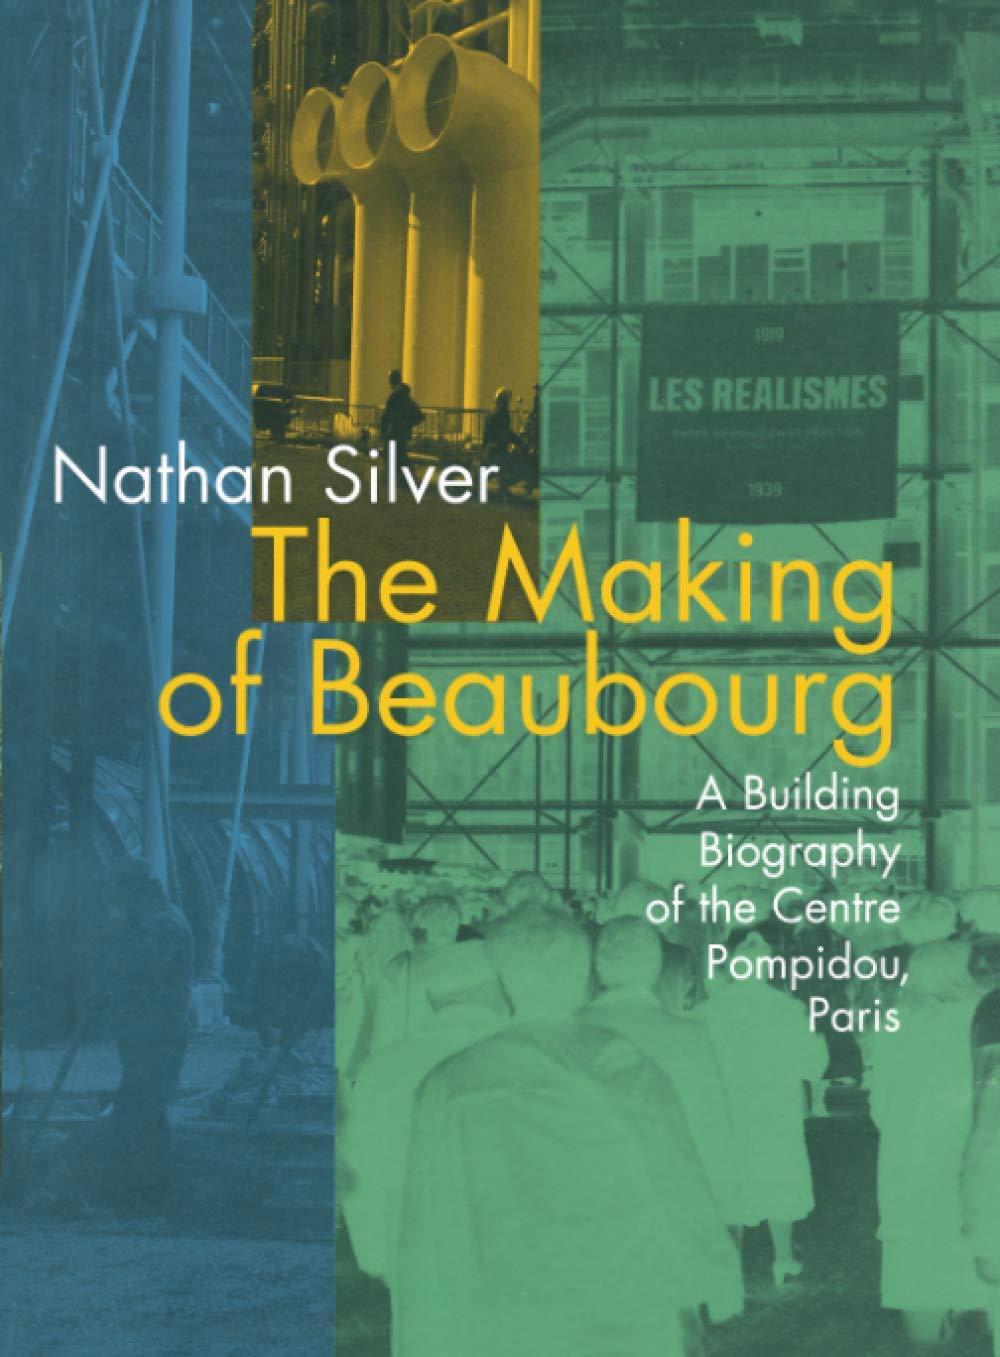 The Making of Beaubourg: A Building Biography of the Centre Pompidou, Paris (The MIT Press)